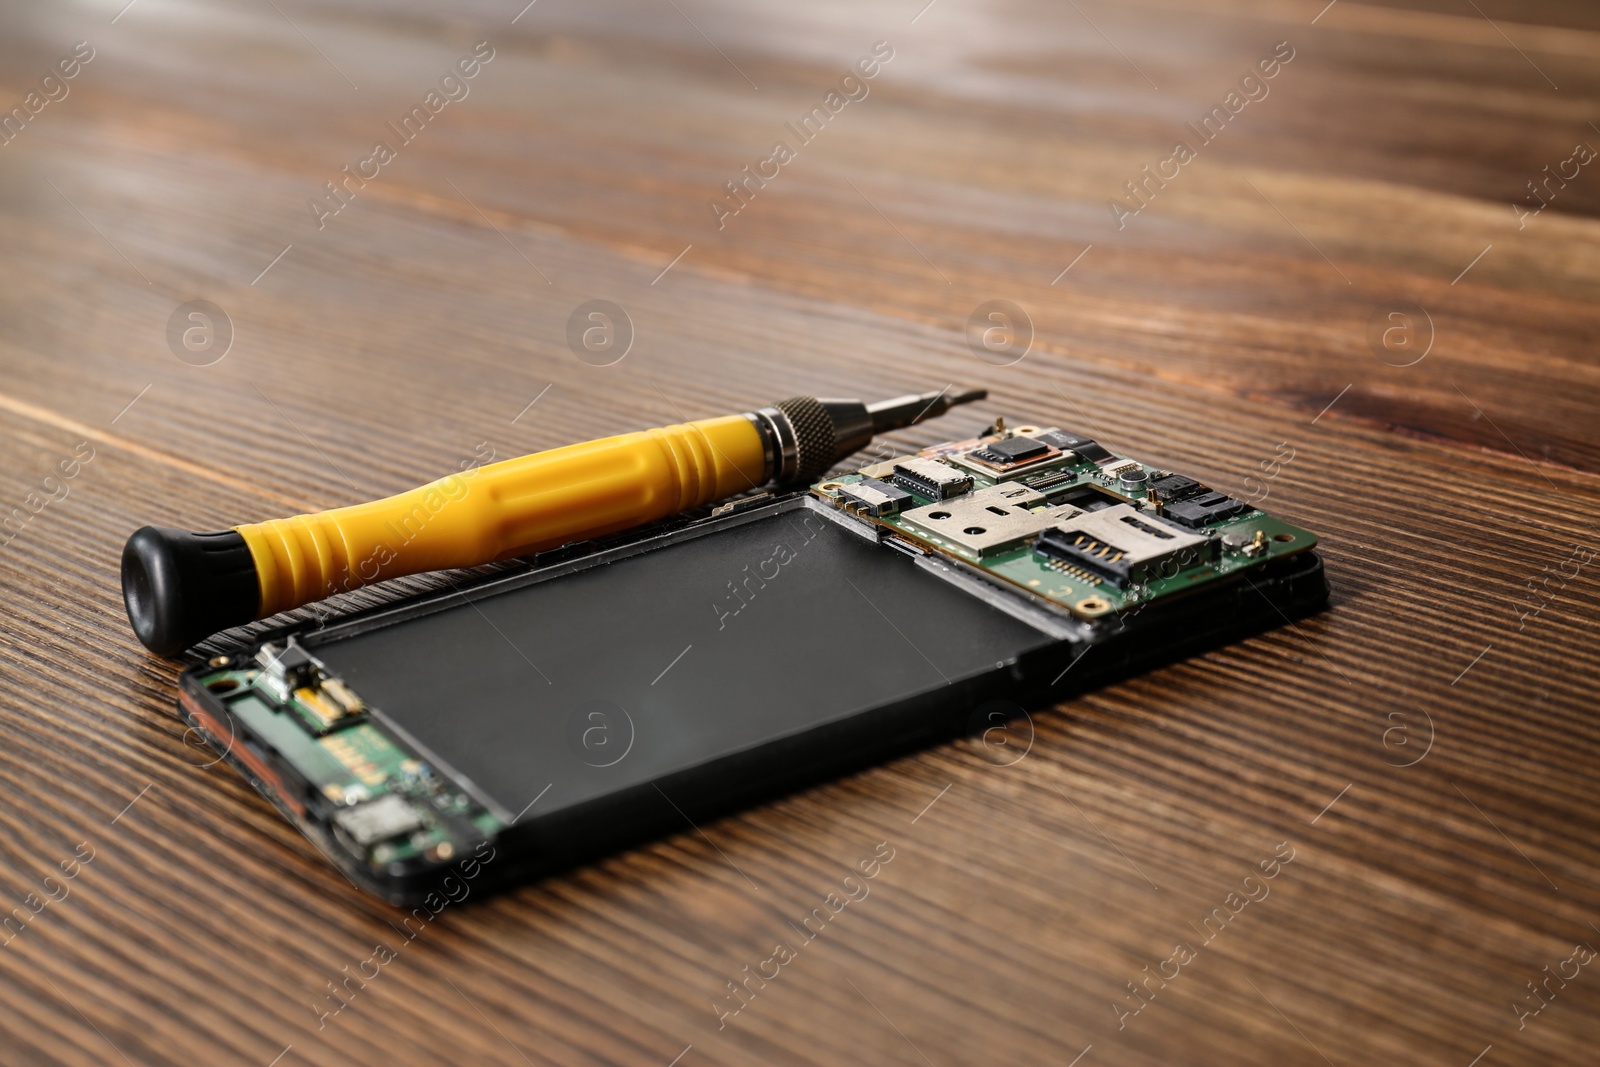 Photo of Broken mobile phone and screwdriver on wooden table, closeup